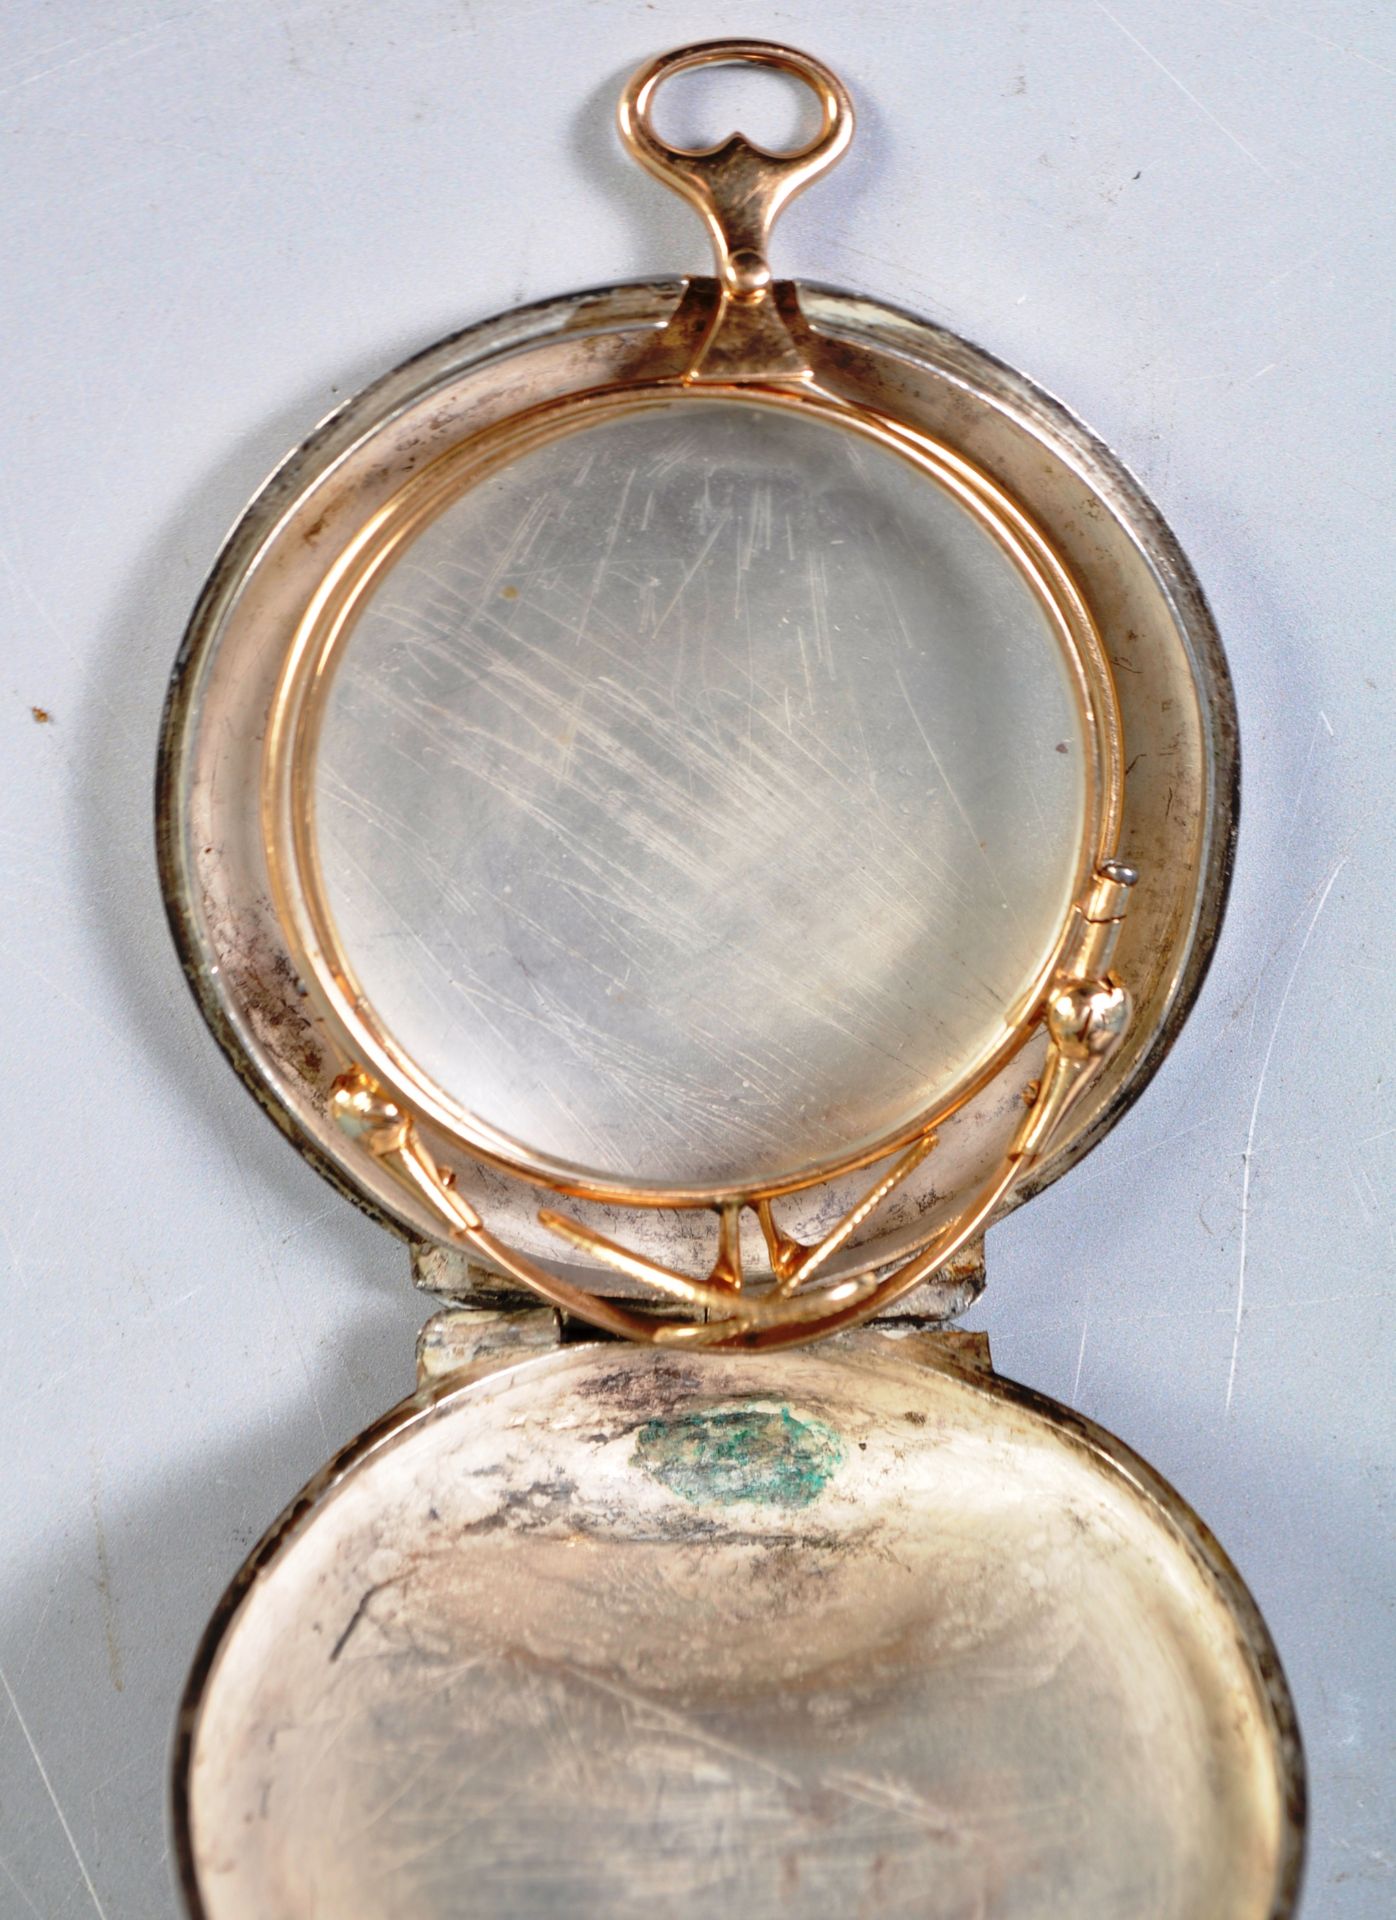 EARLY 20TH CENTURY GOLD LORGNETTE WITHIN A SILVER CASE - Image 4 of 7